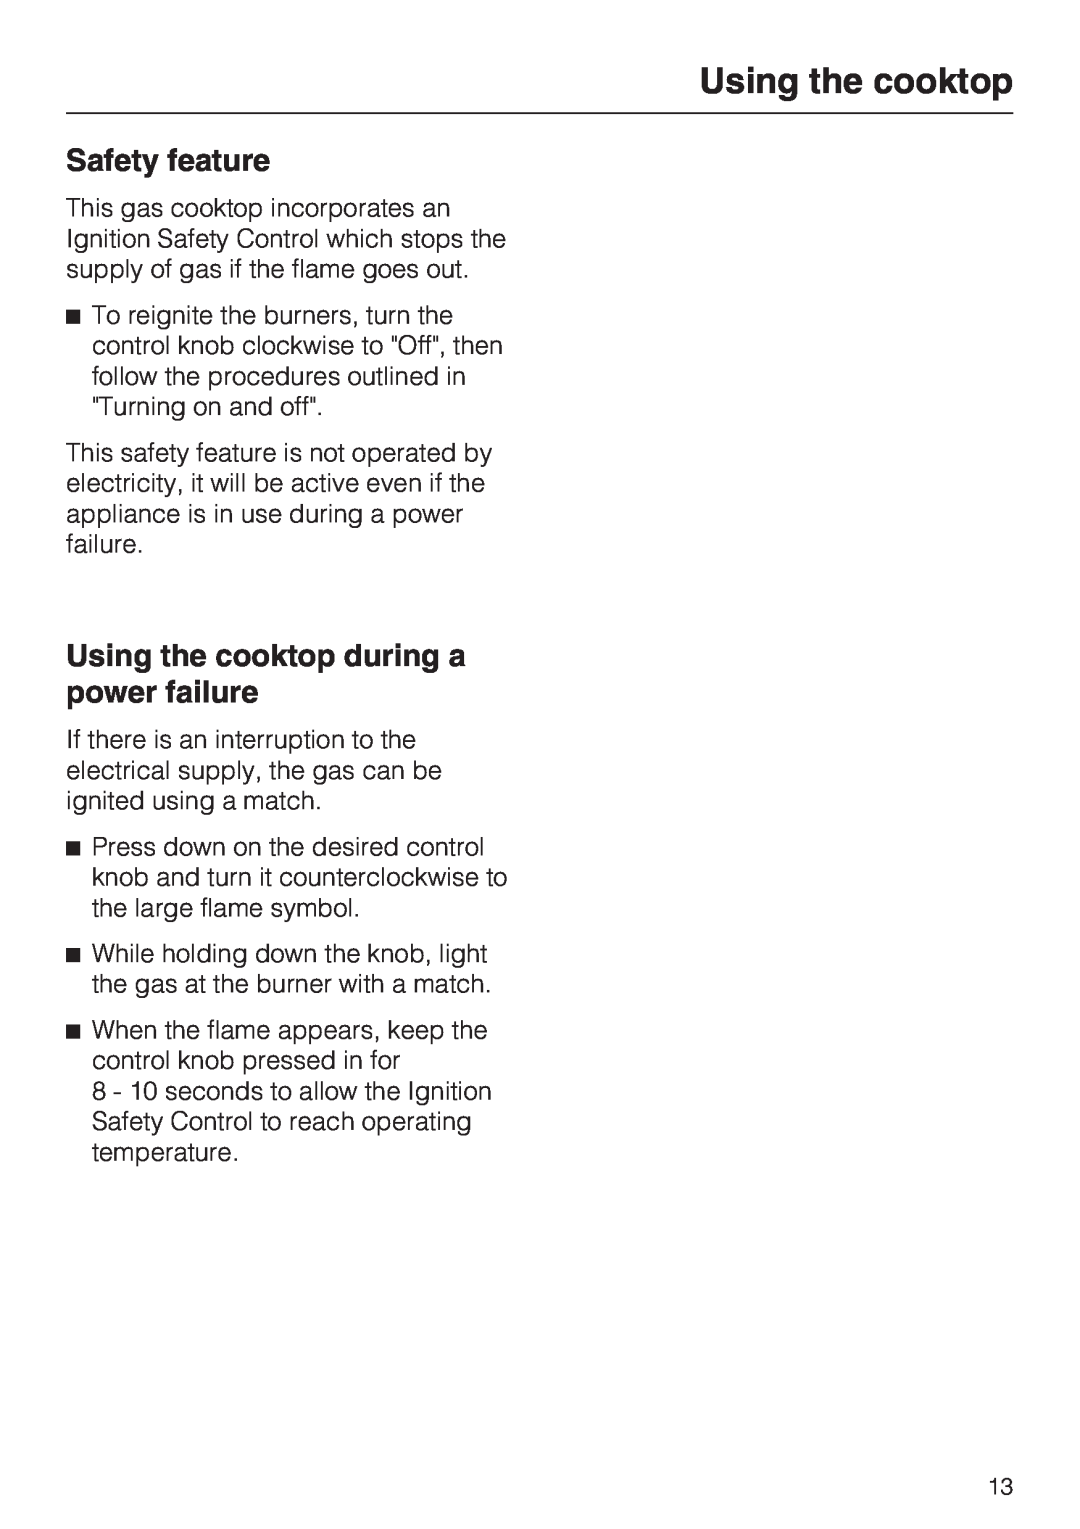 Miele KM 360 operating instructions Safety feature, Using the cooktop during a power failure 